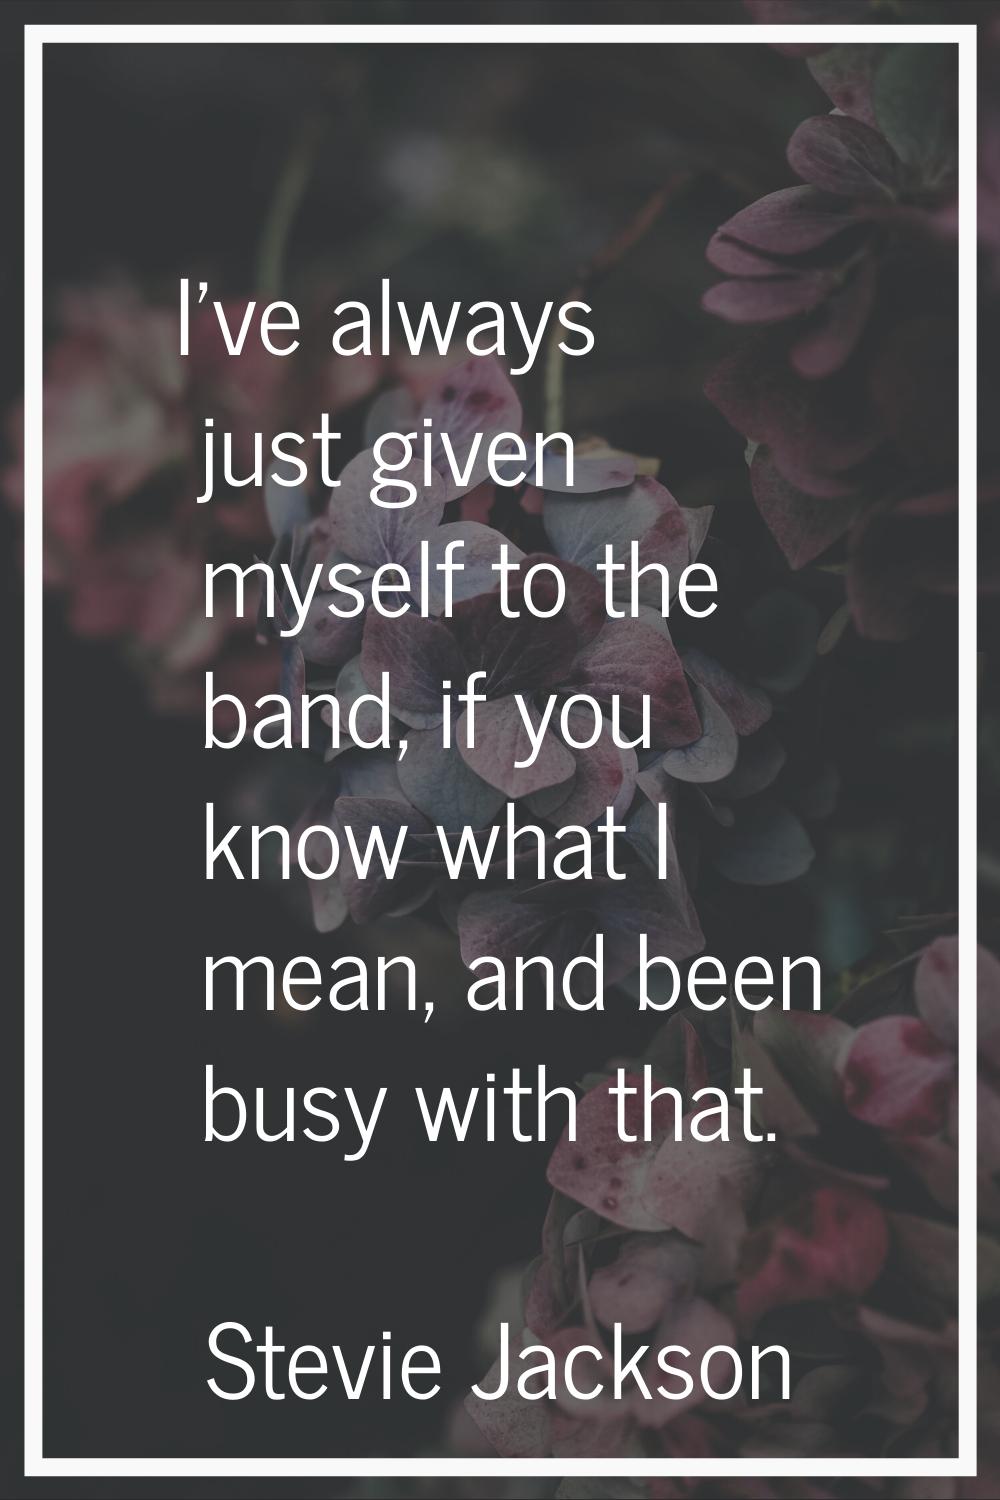 I've always just given myself to the band, if you know what I mean, and been busy with that.